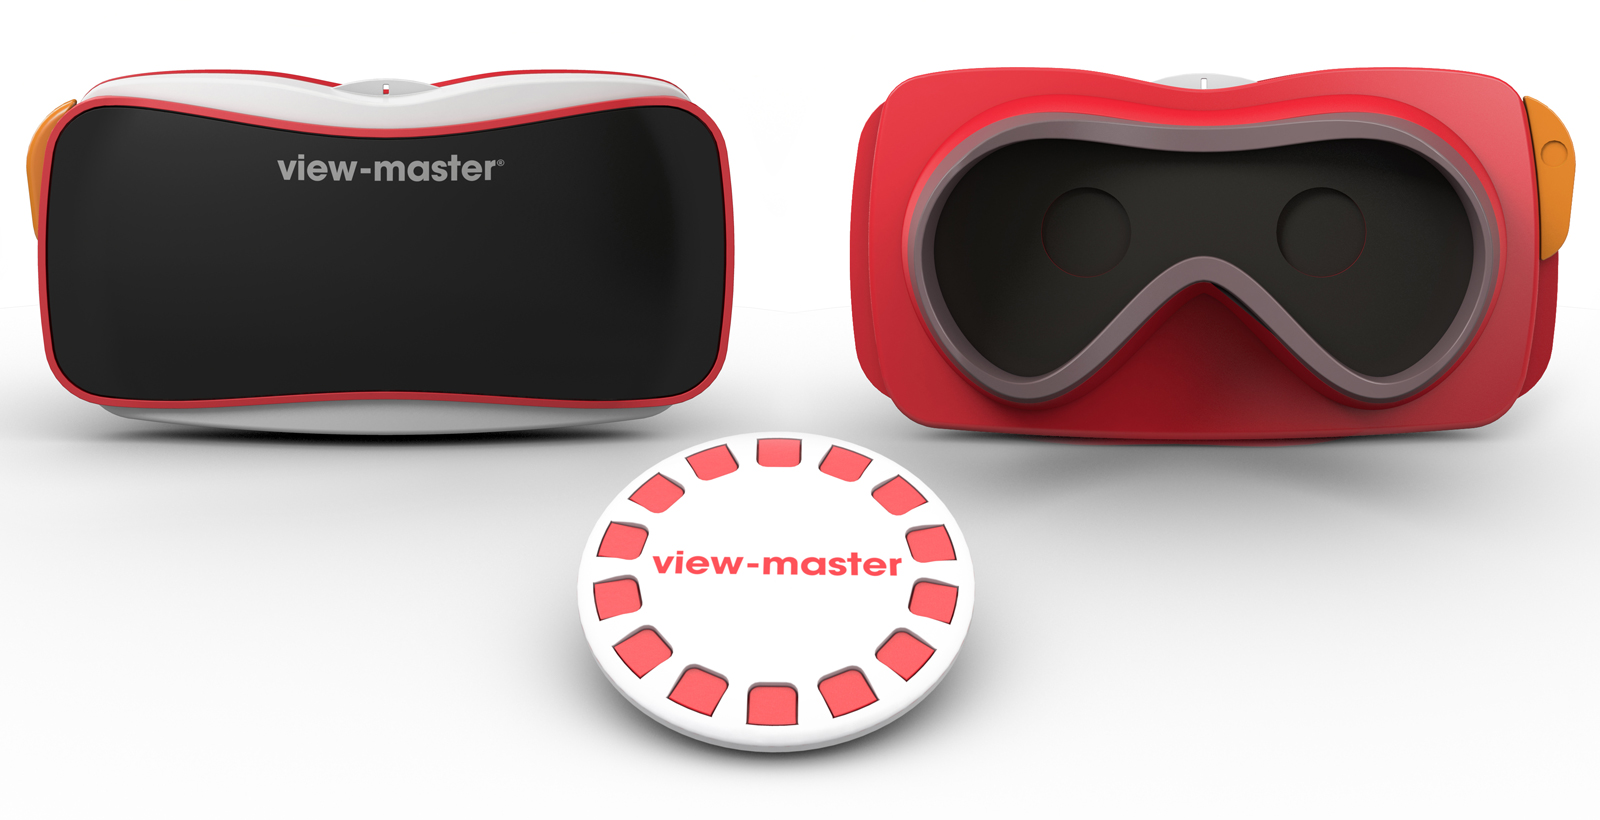 viewmastersizzle